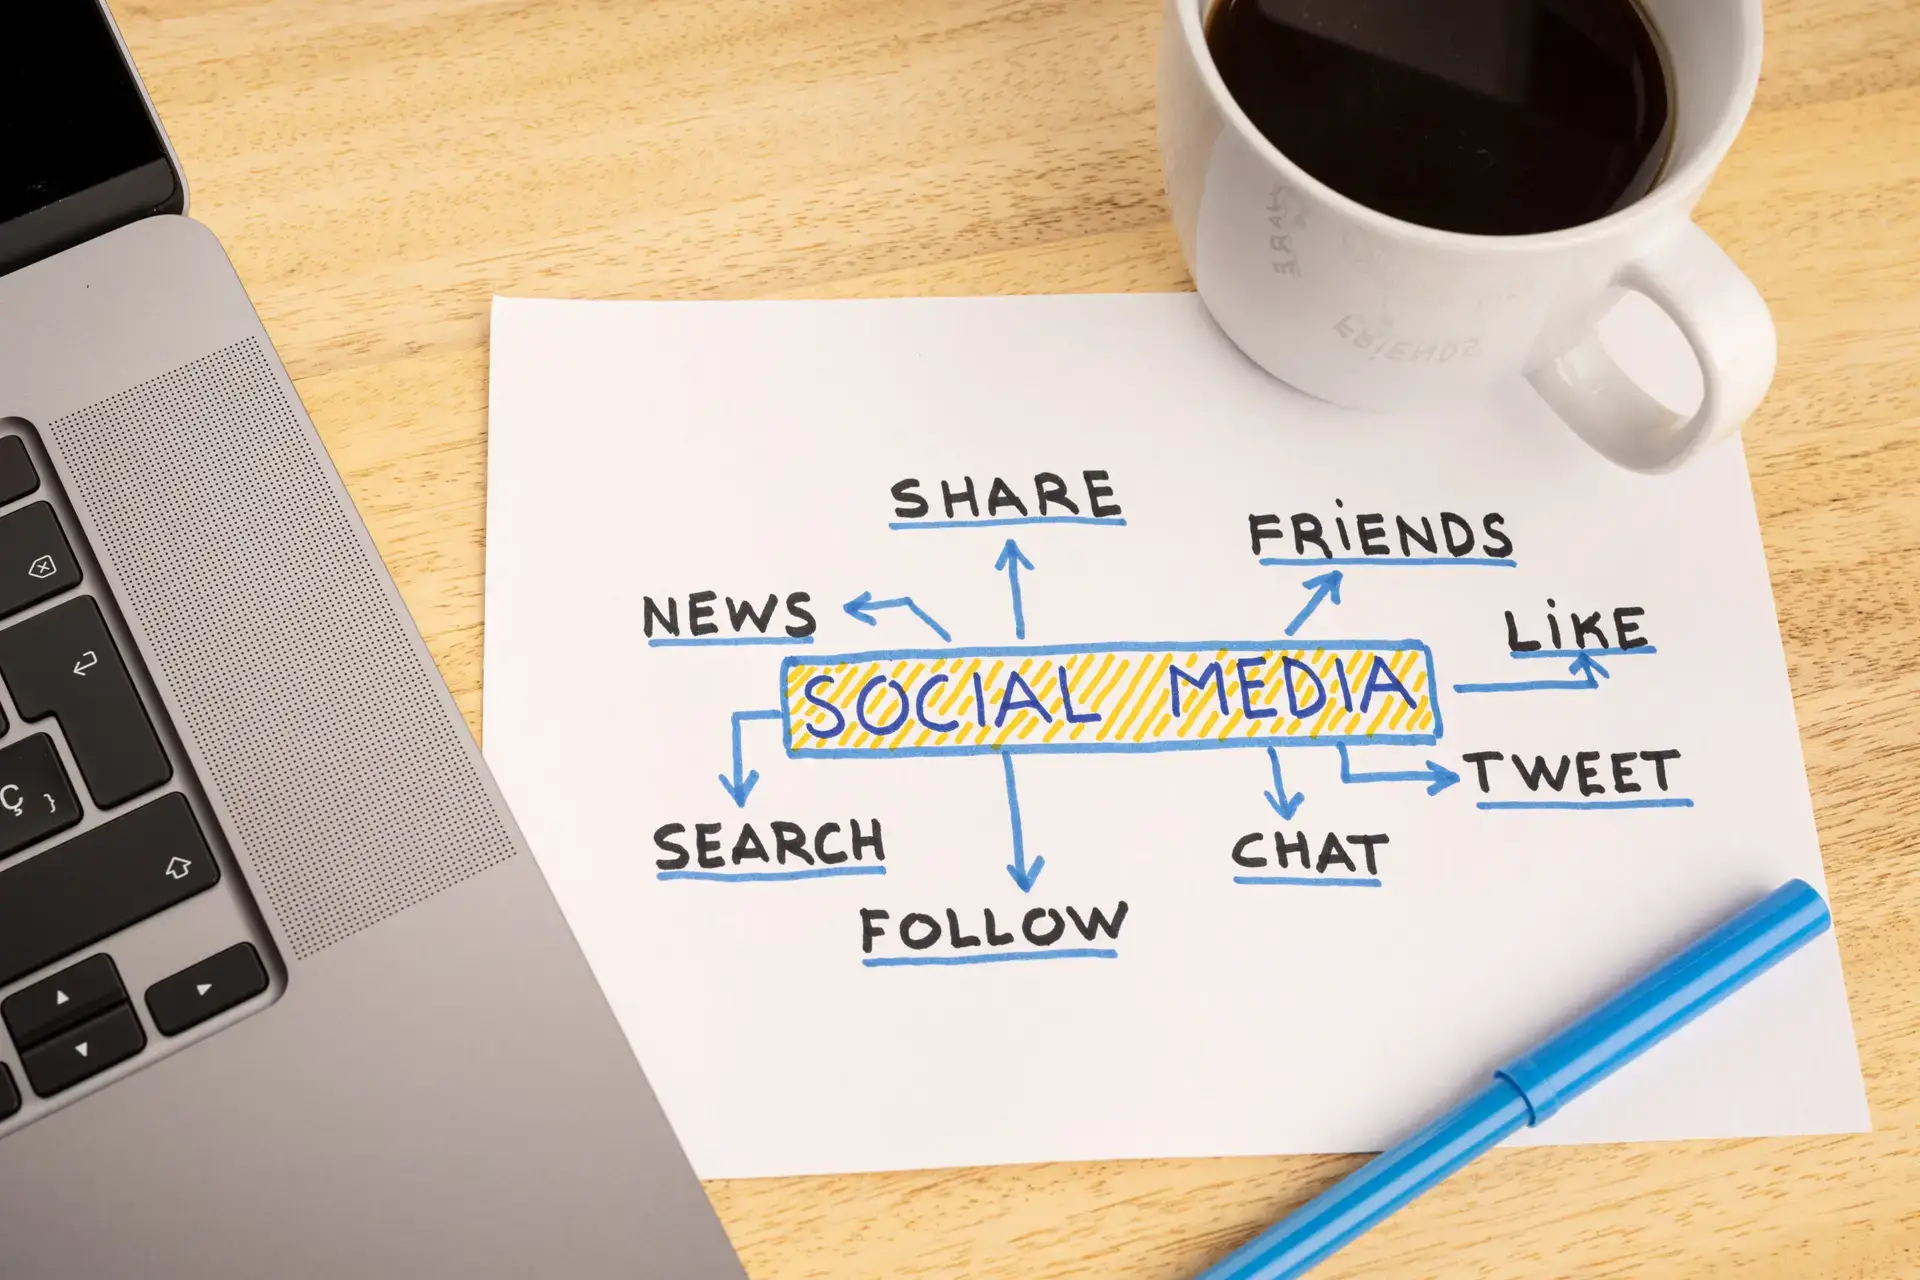 How Can You Create a Social Media Campaign That Is Both Timely and Relevant?